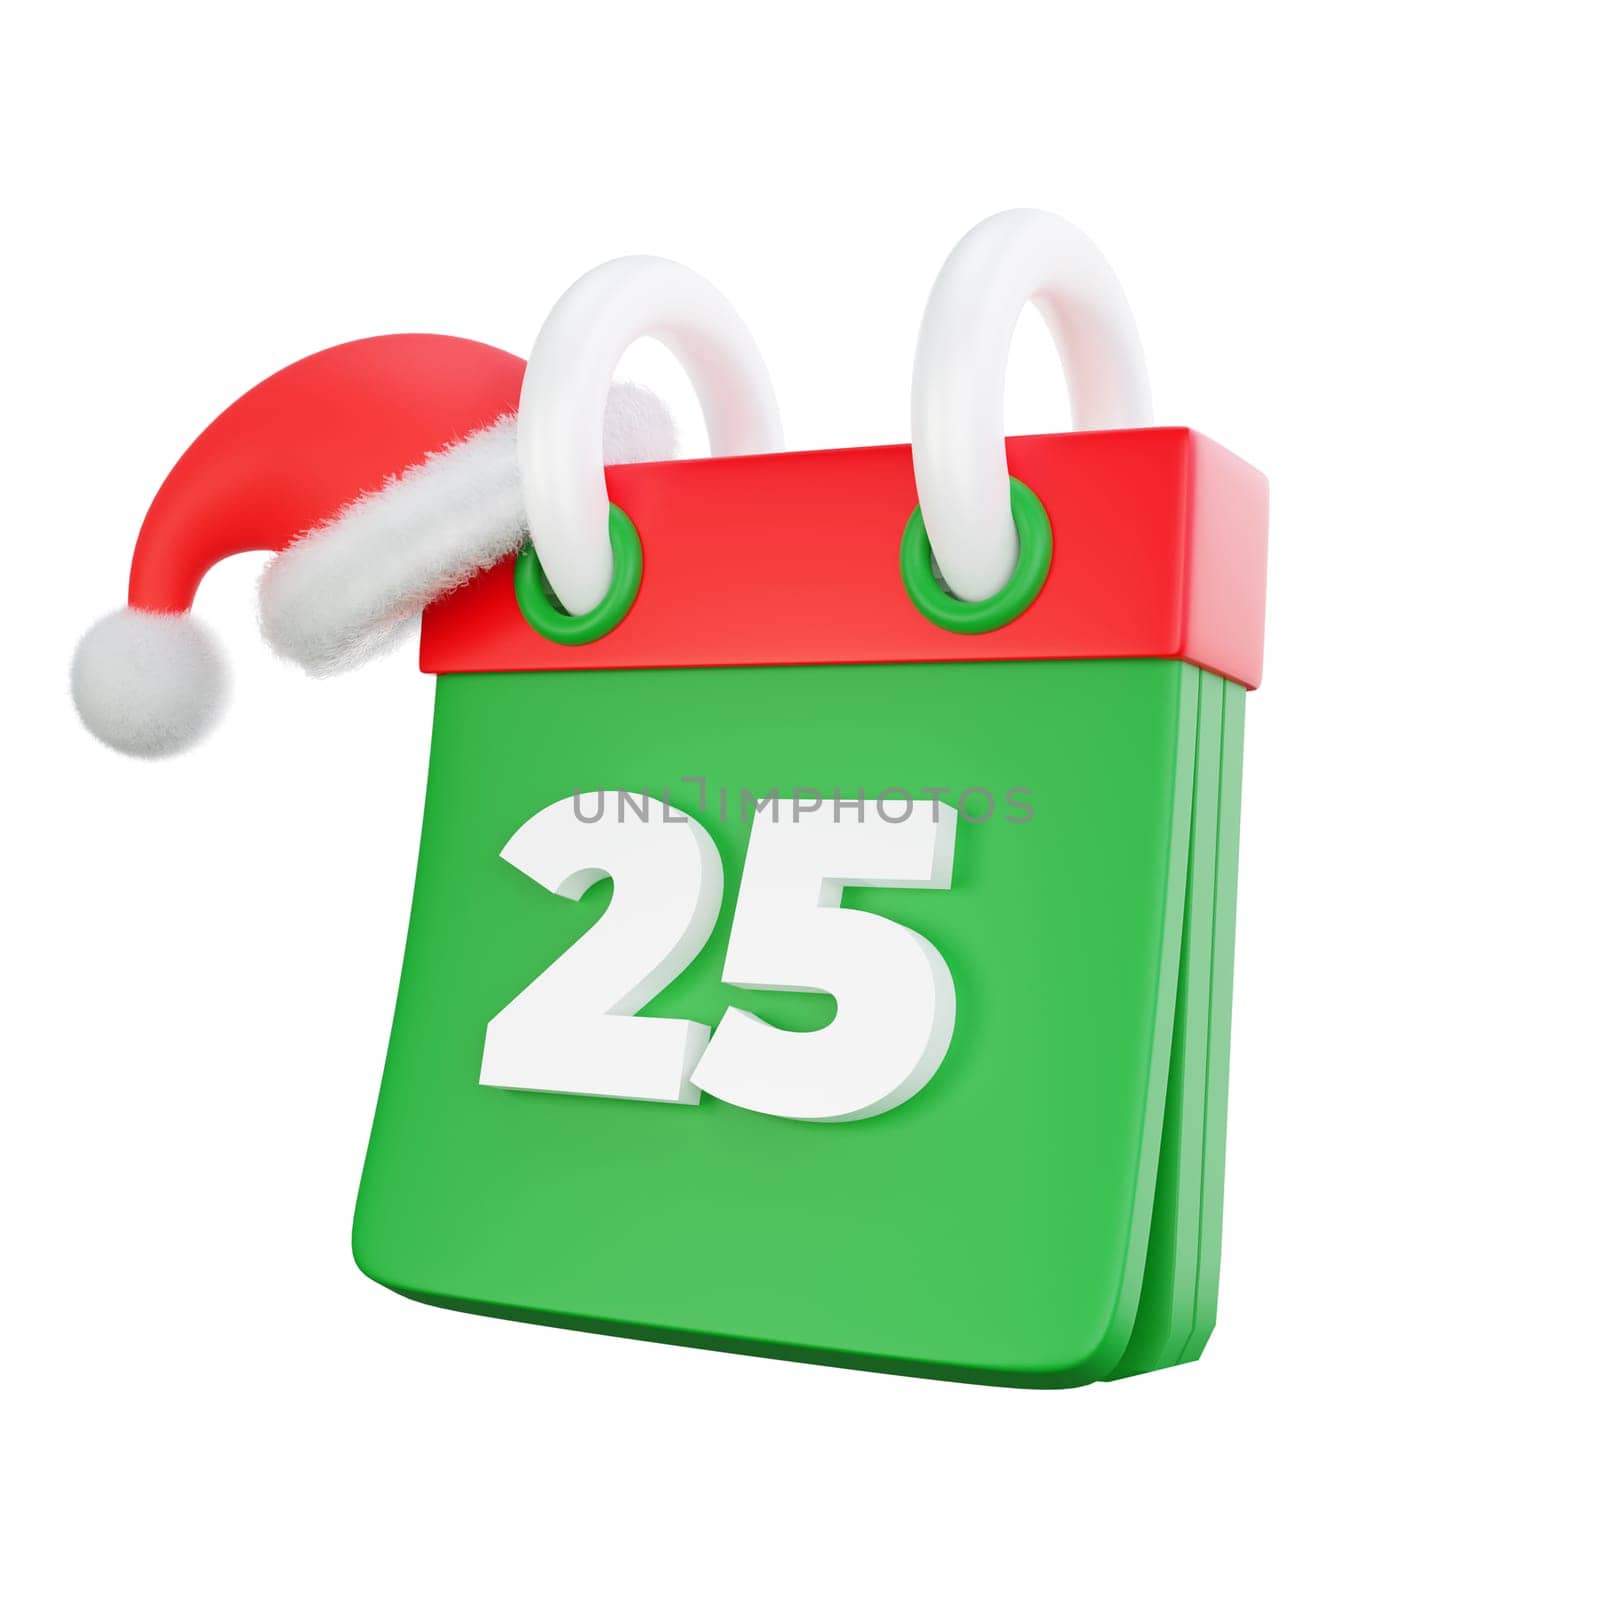 3D illustration of a Christmas calendar icon. Perfect for Christmas and happy new year celebrations